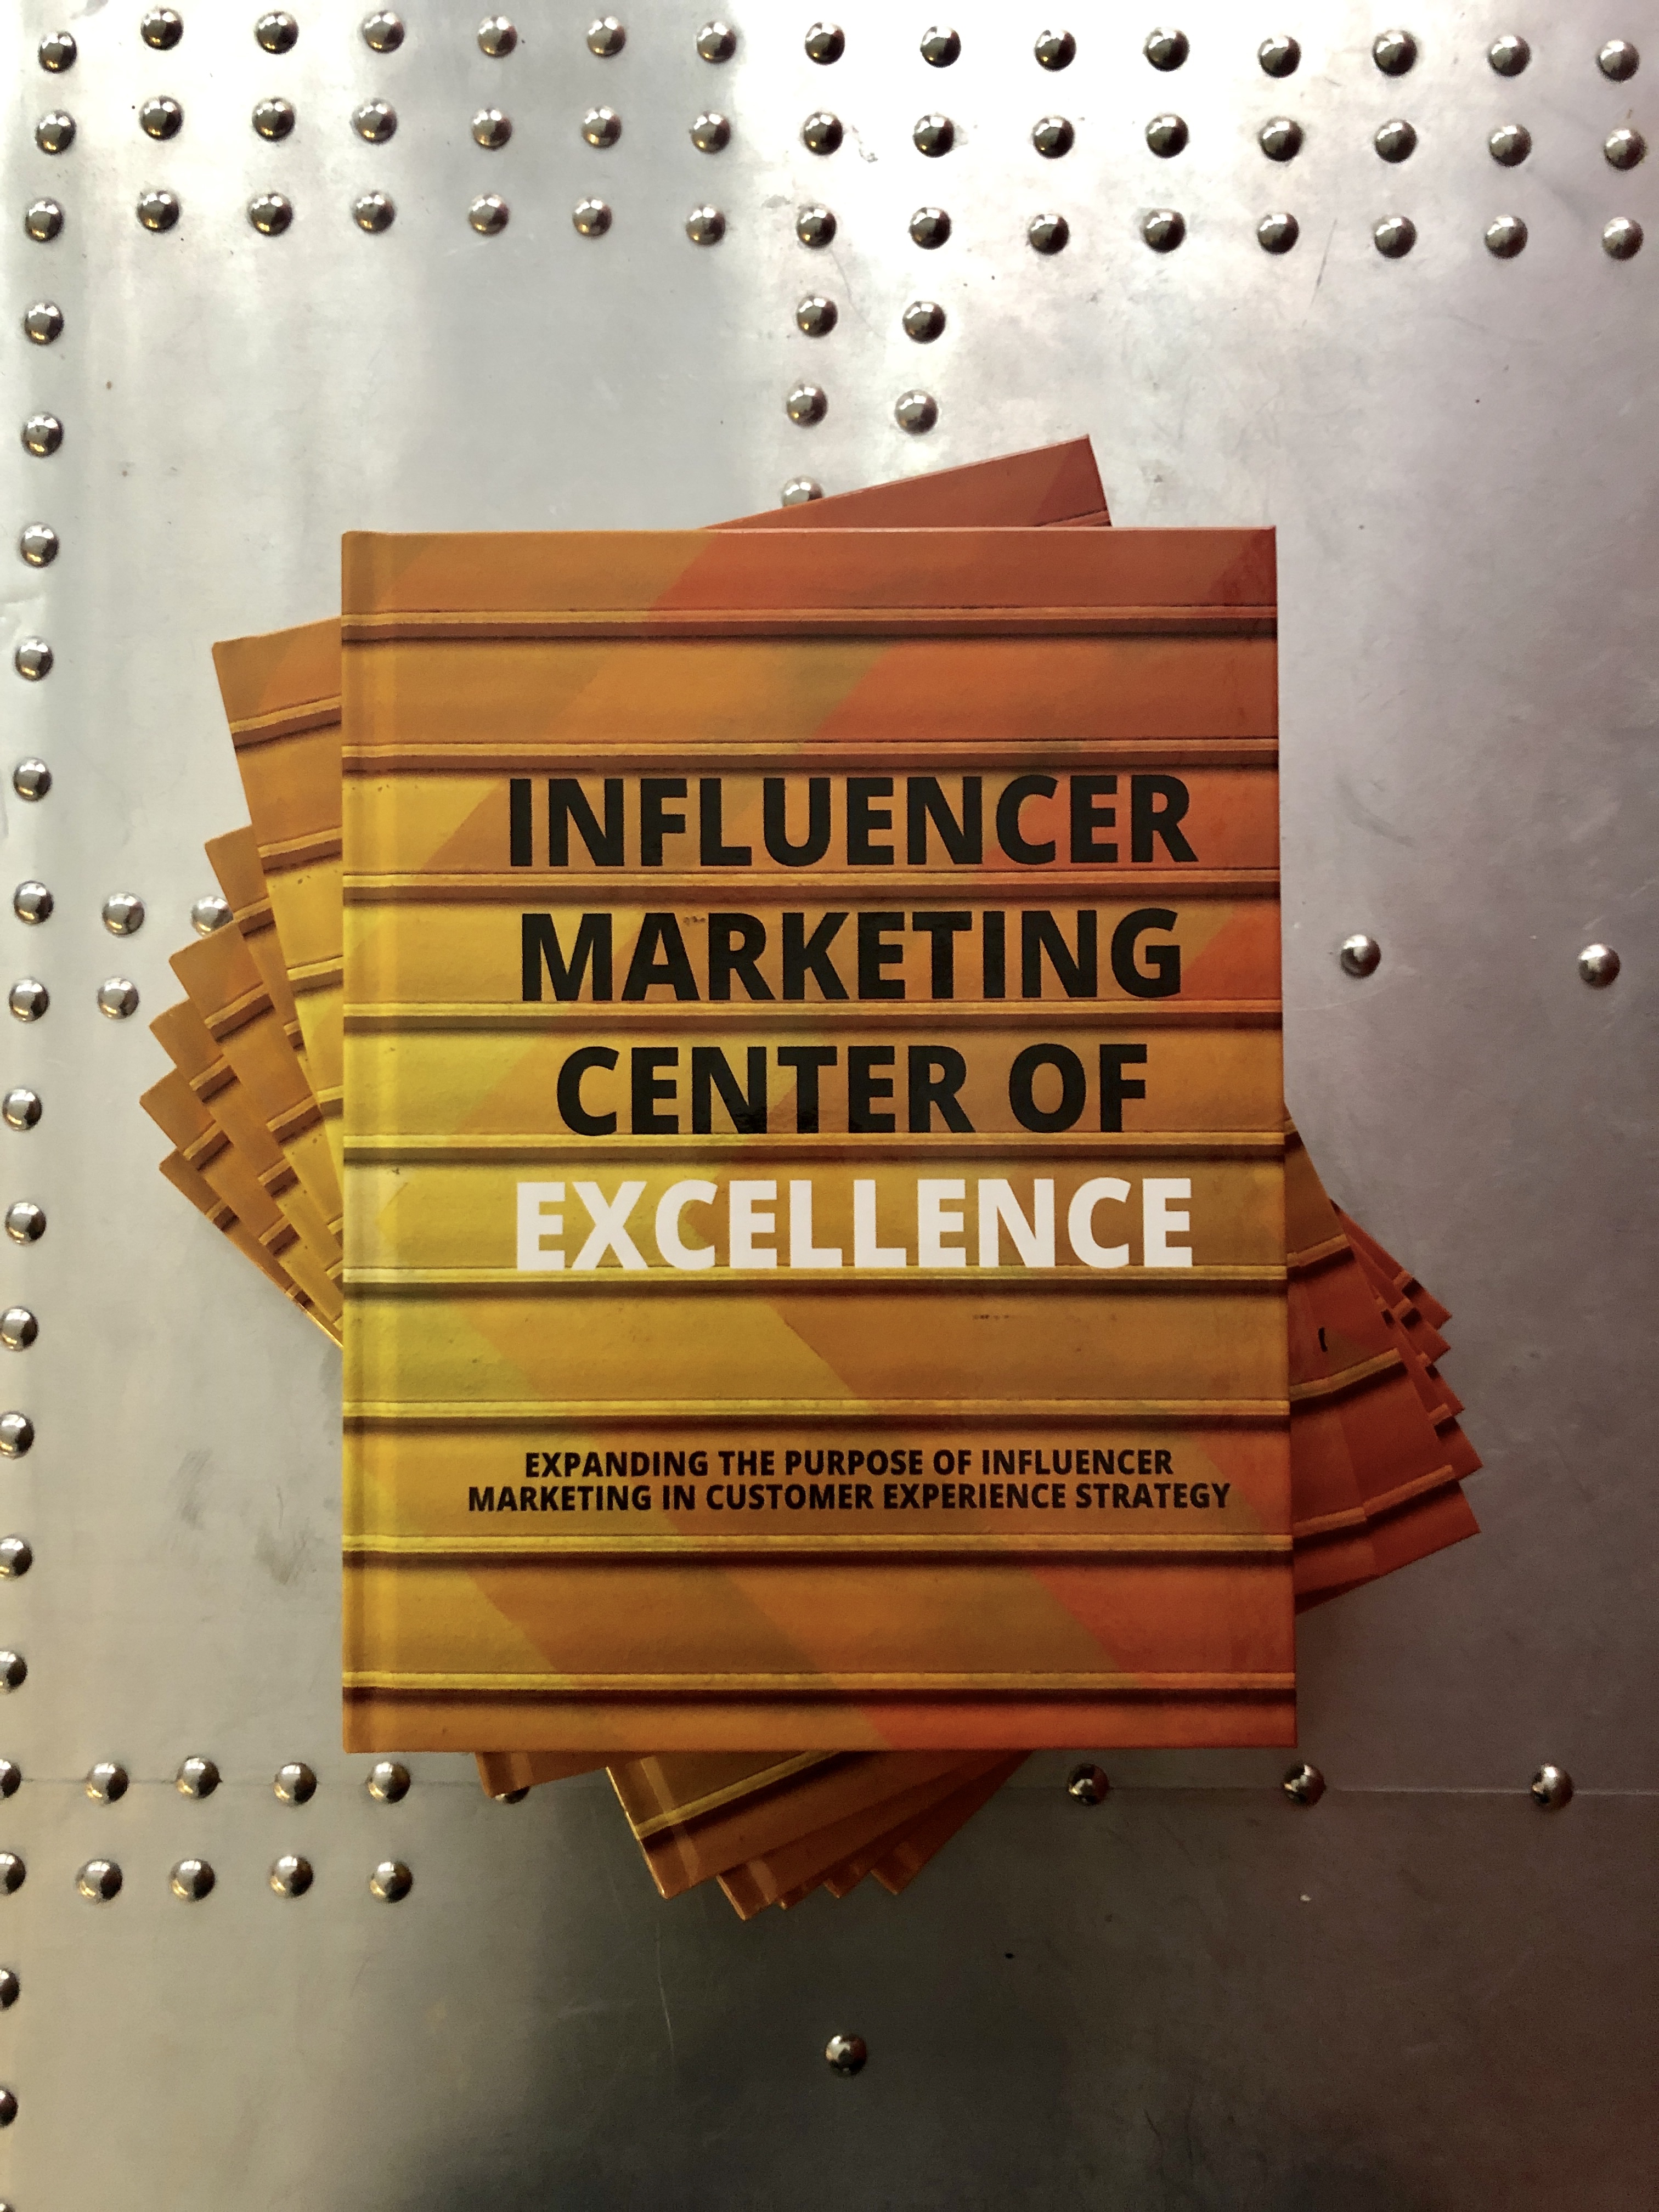 Influencer Marketing Center of Excellence